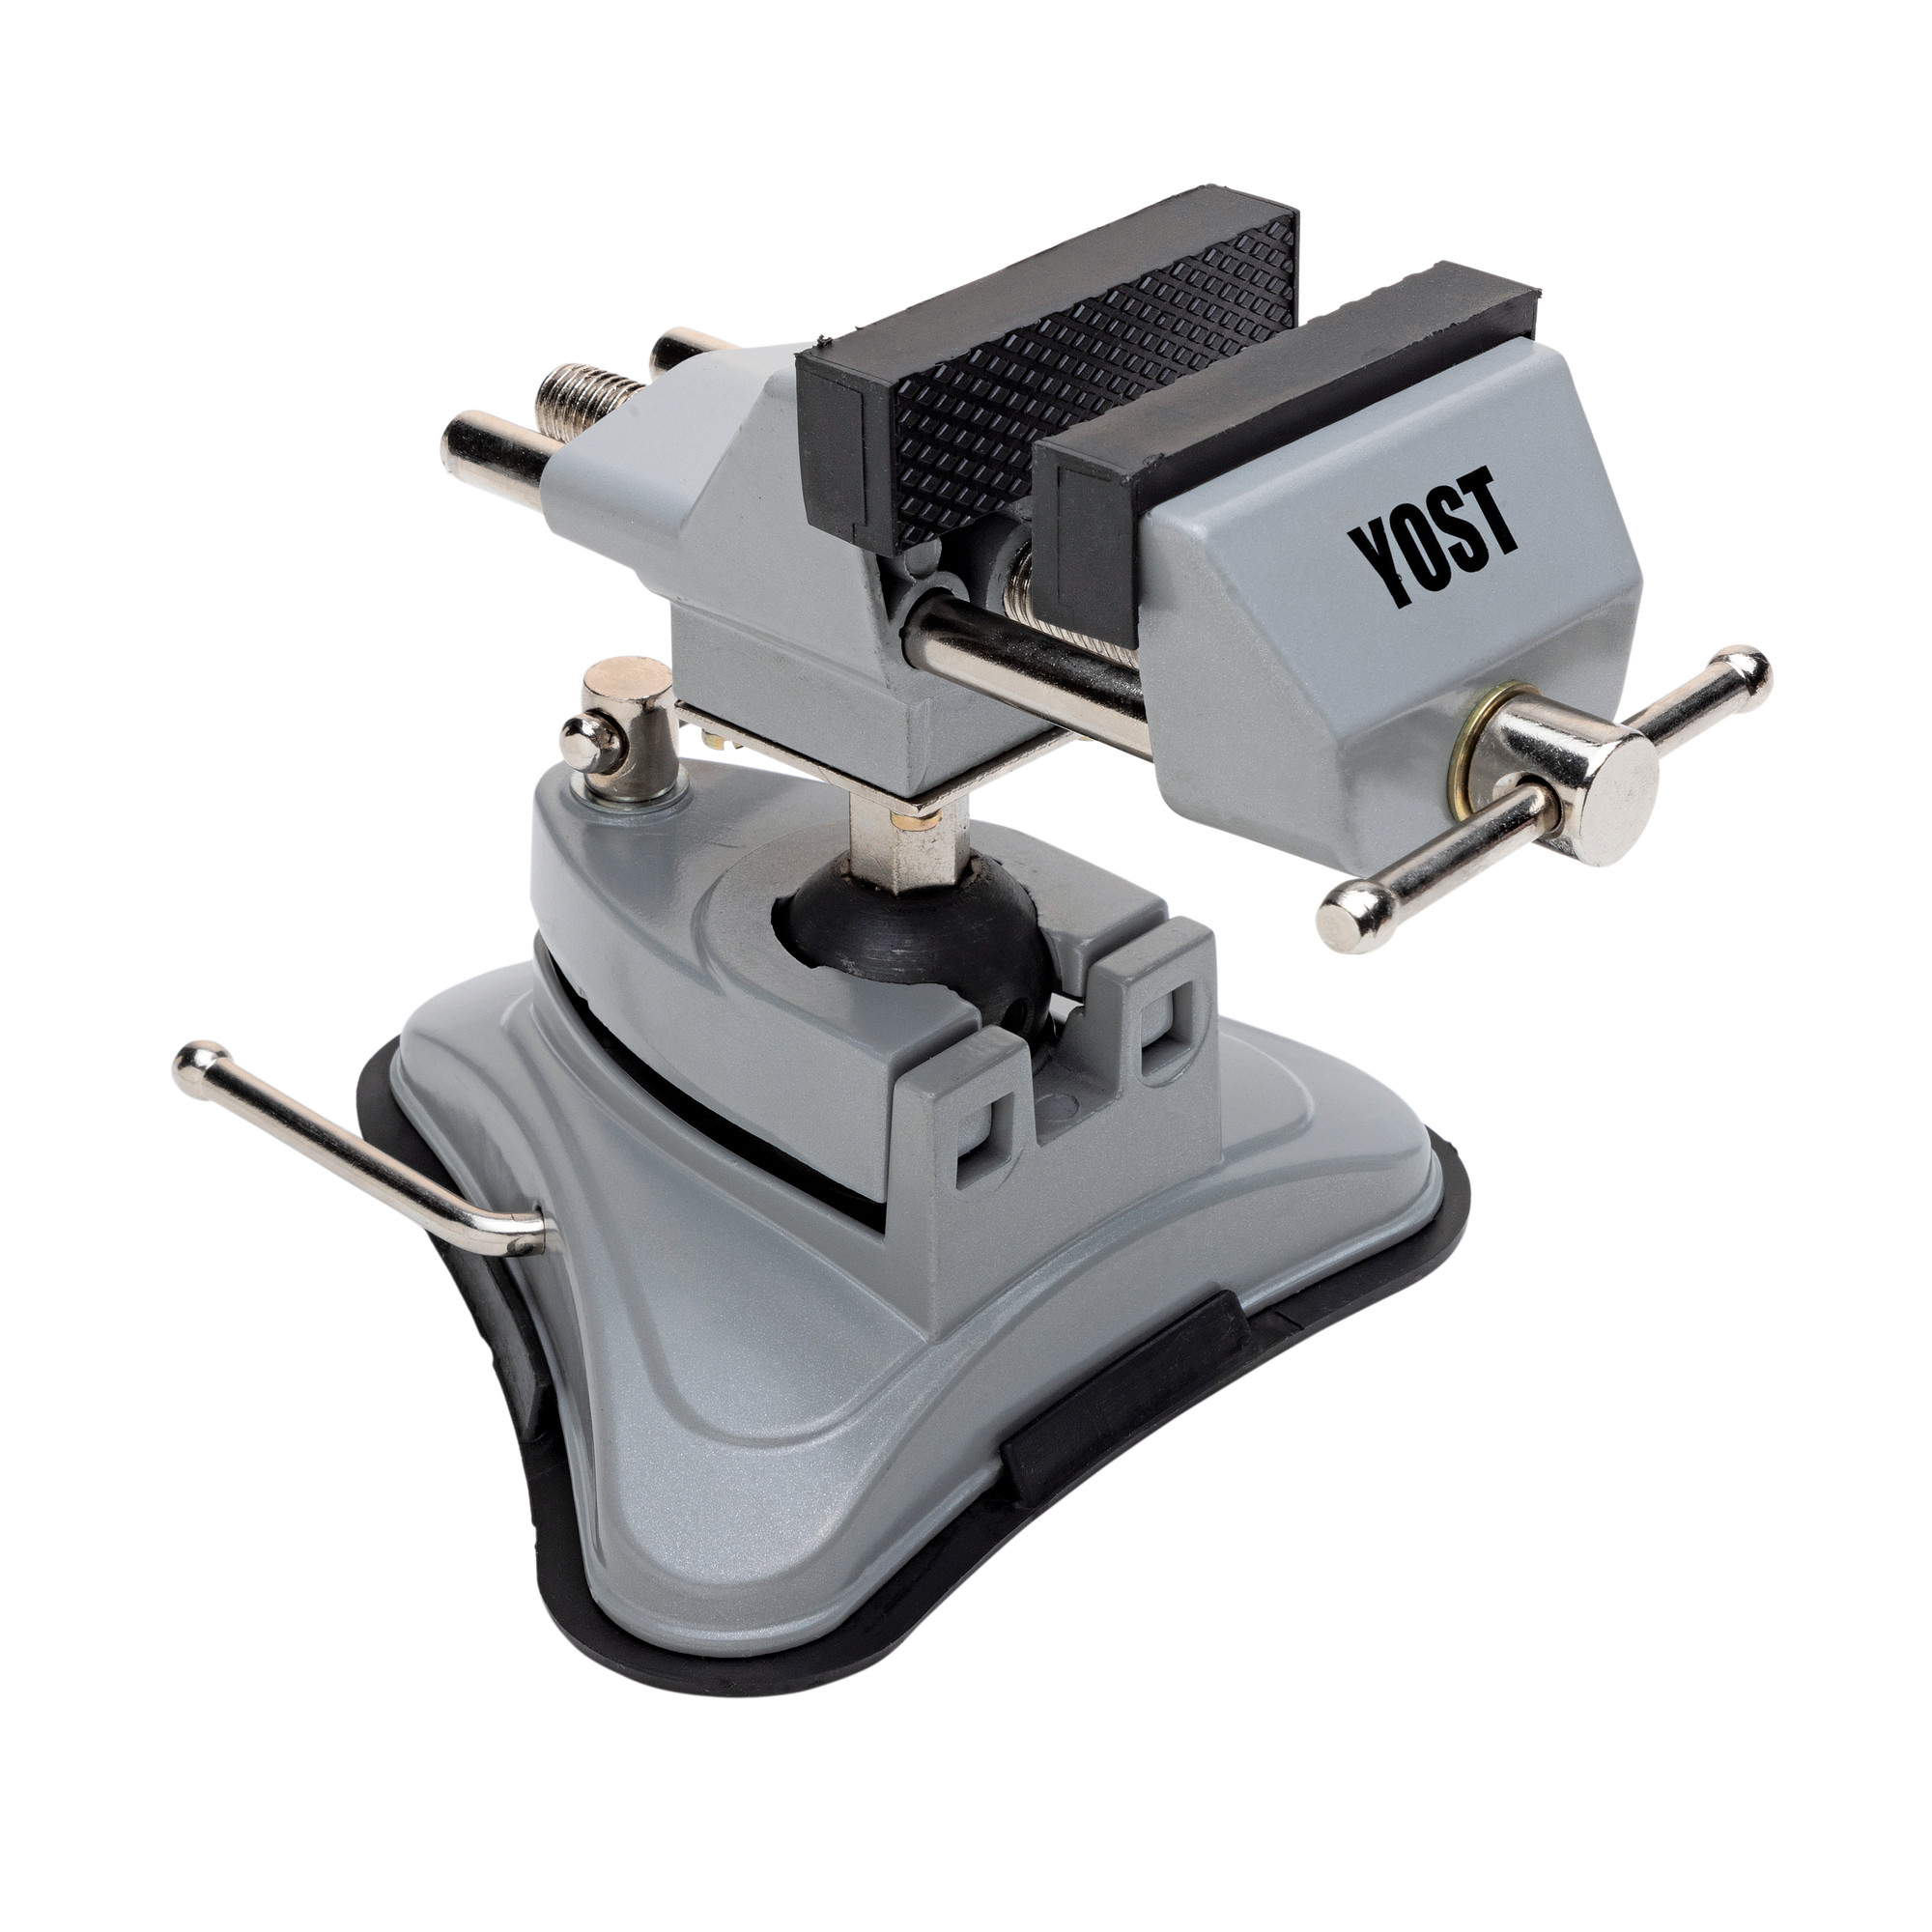 Yost Vises, 2.75Inch Portable Vise, Jaw Width 2.75 in, Jaw Capacity 2.5 in, Material Aluminum, Model V-275